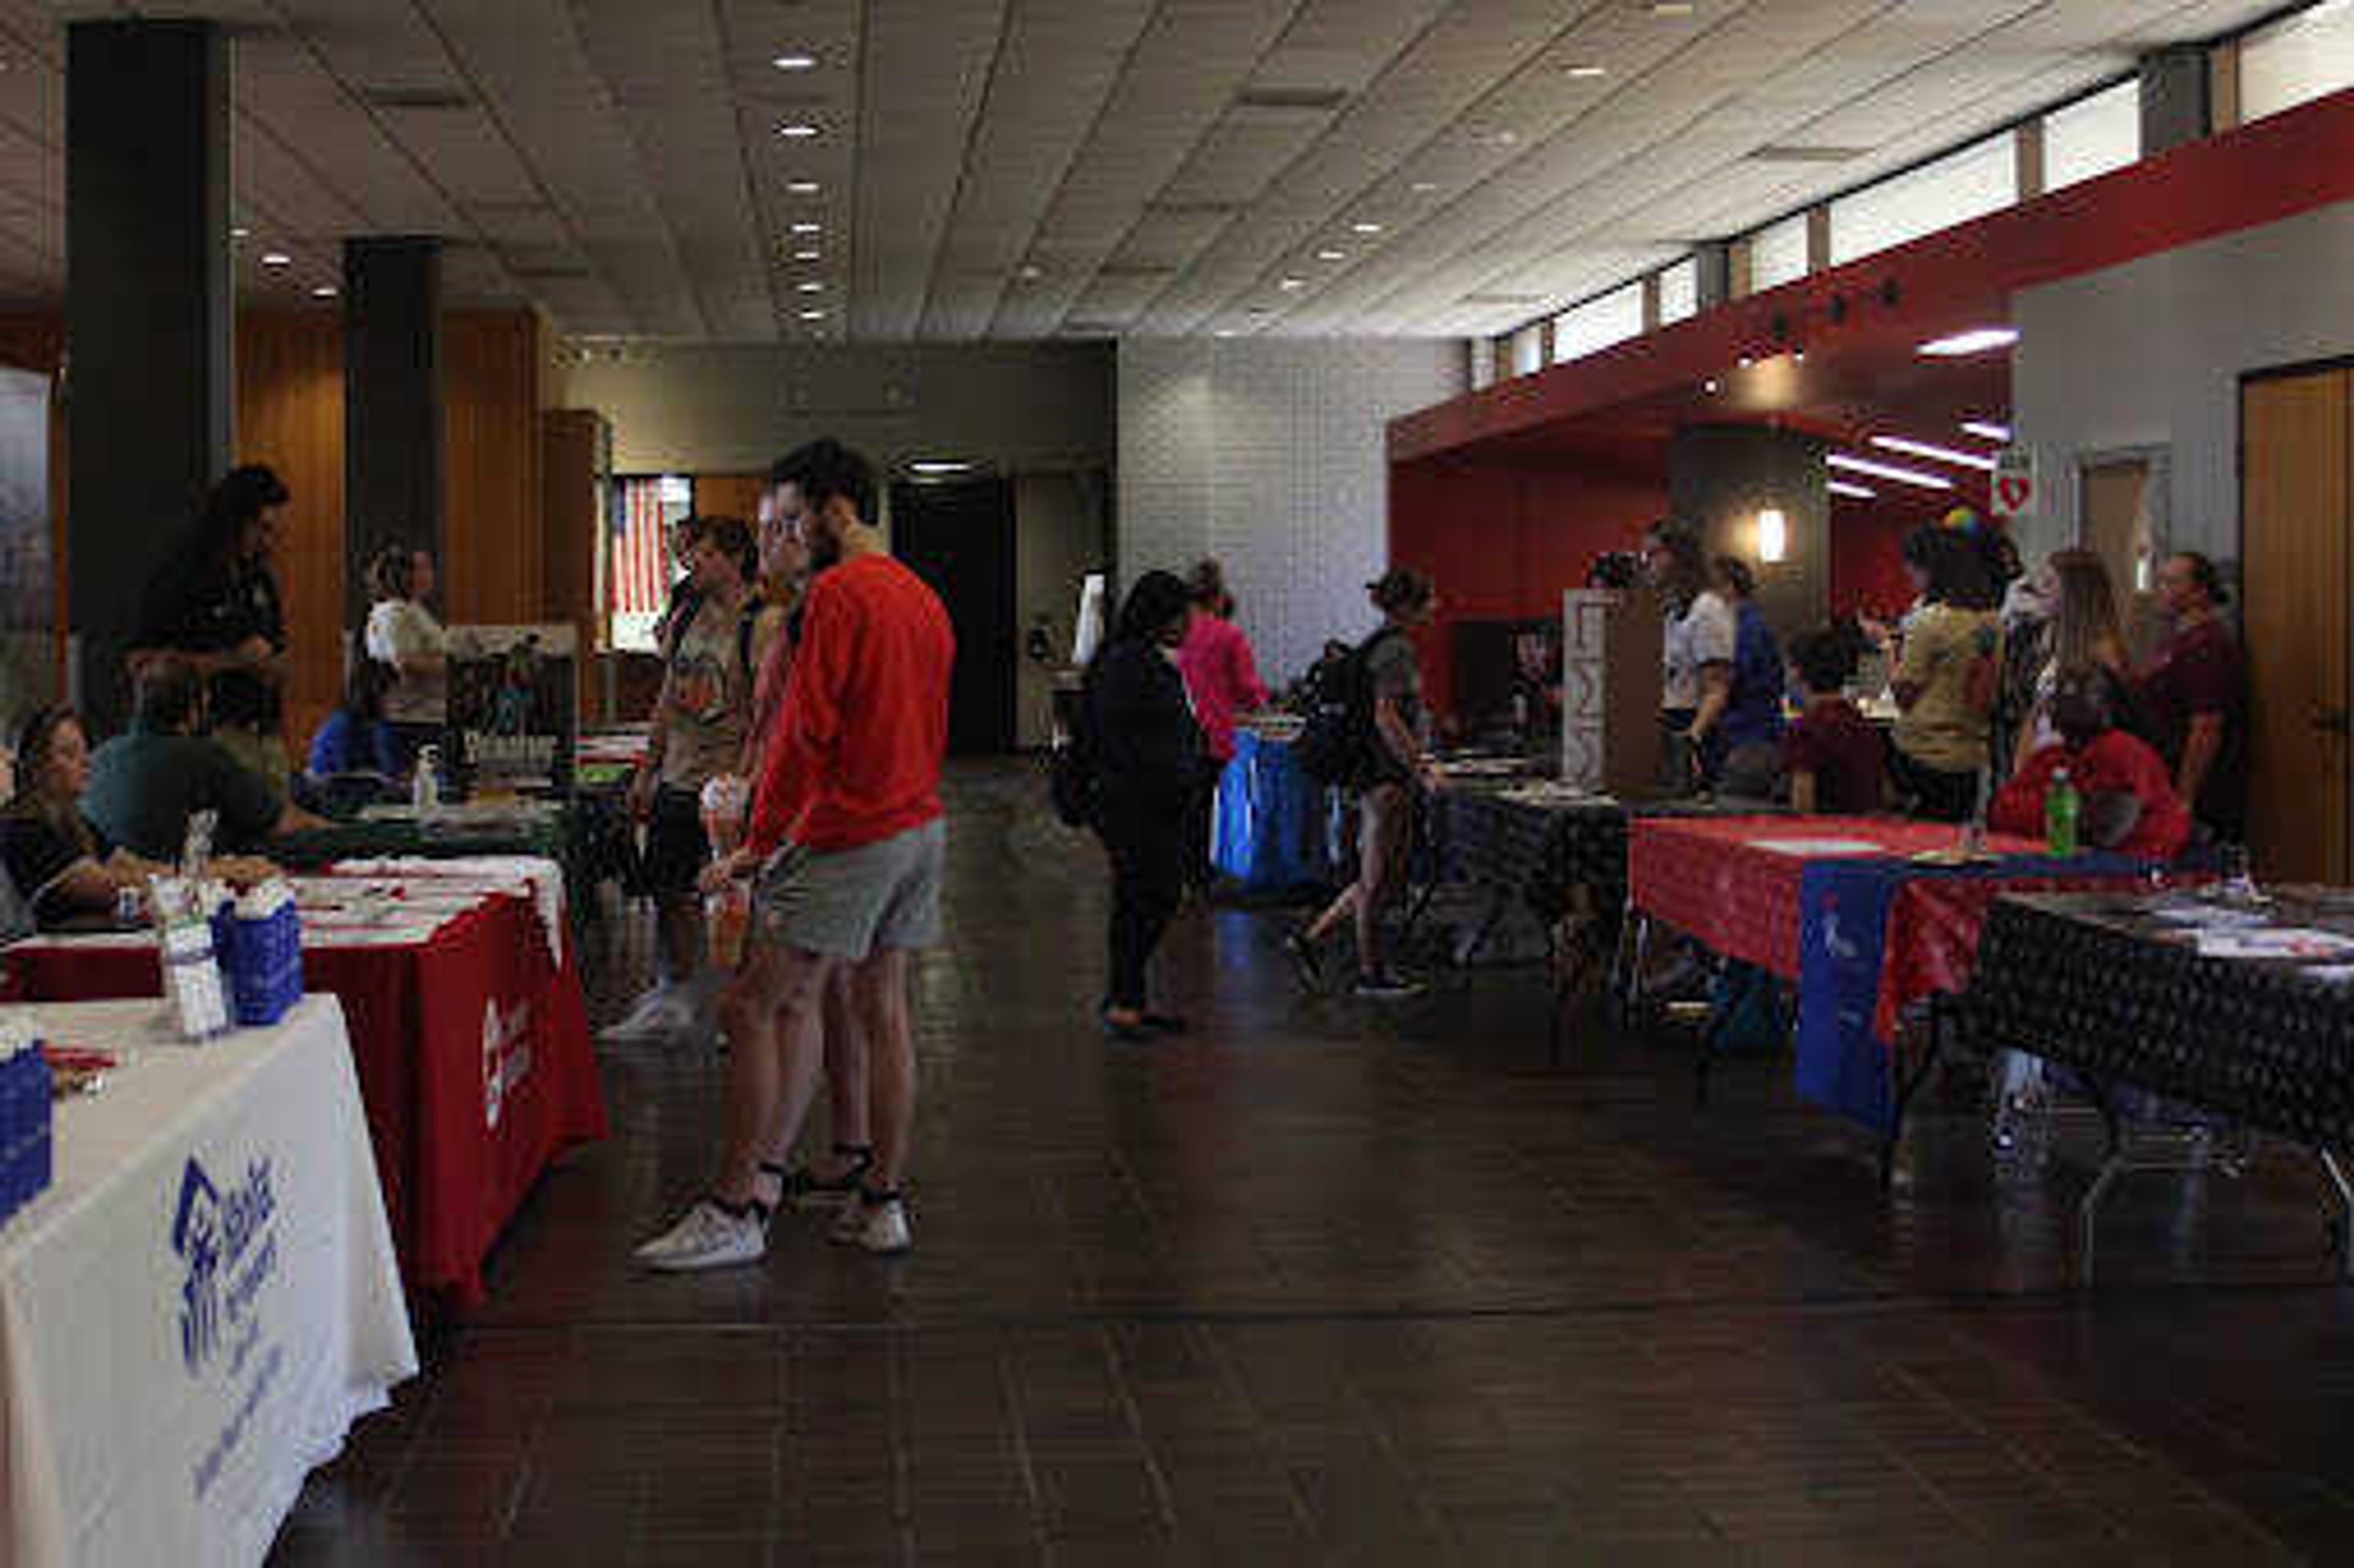 Volunteer Fair creates opportunities for students to engage with SEMO and community